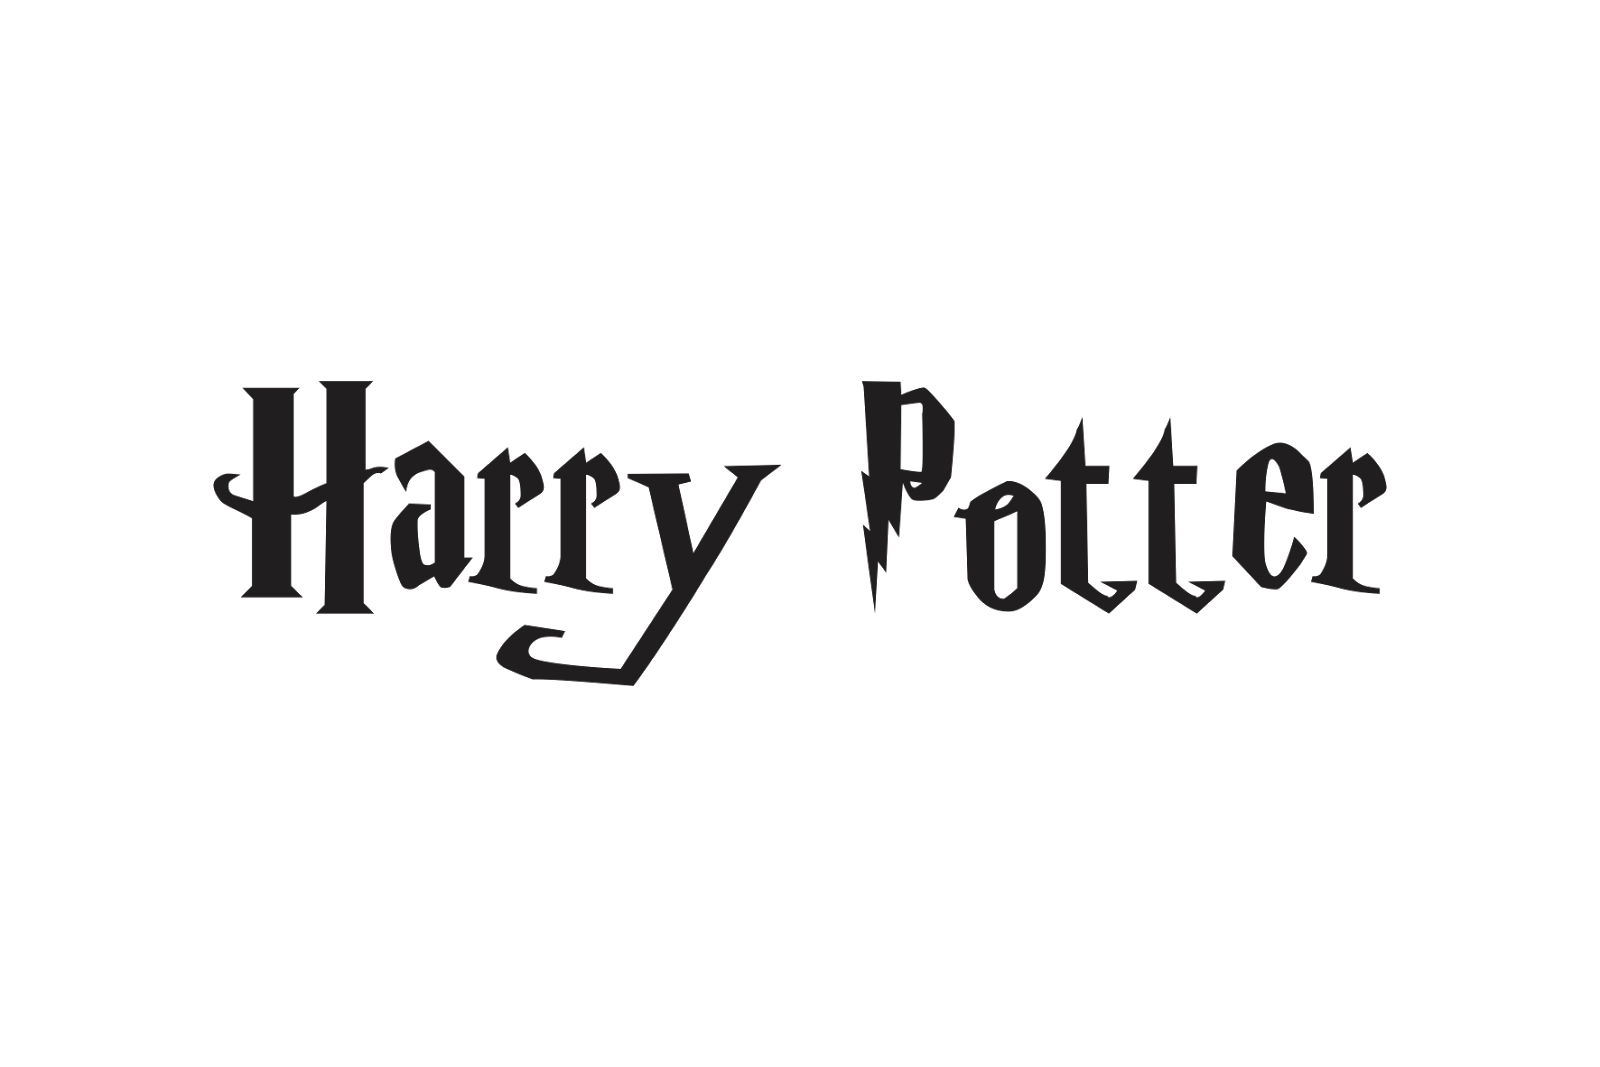 Download Free Harry Potter Logo Images Png Transparent Background Free Download Freeiconspng